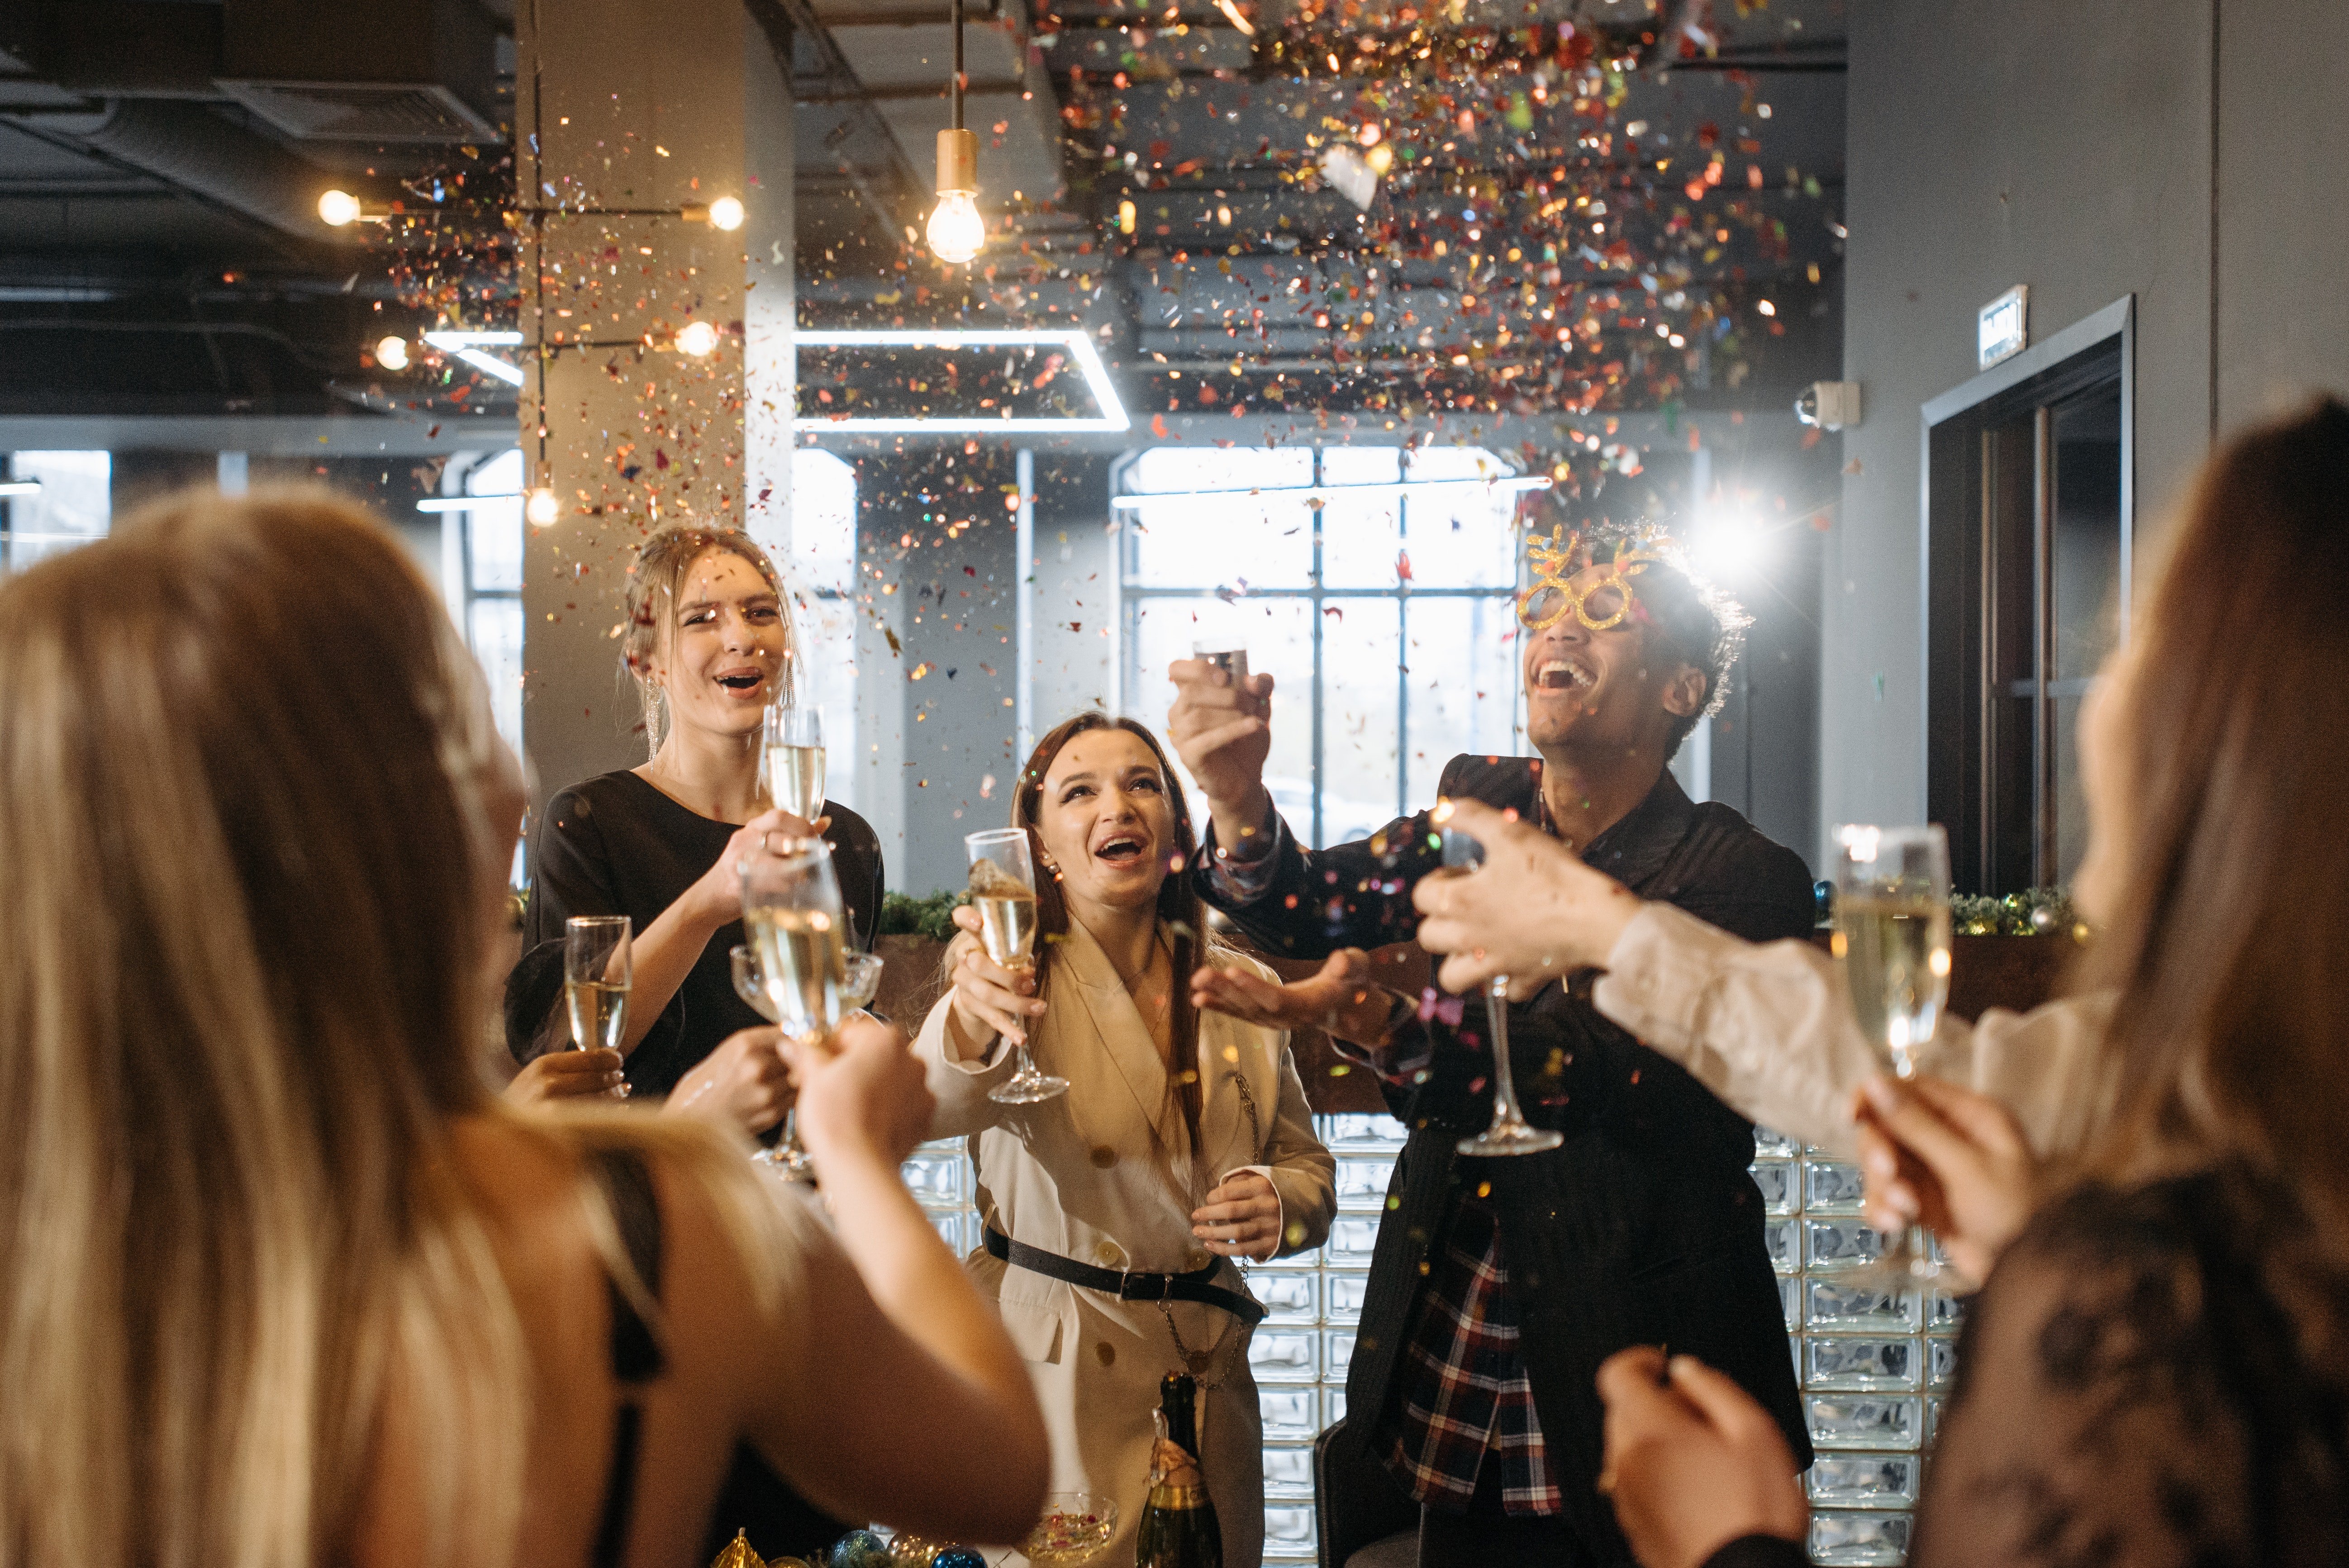 Most people they invited made it to the celebratory event. | Source: Pexels